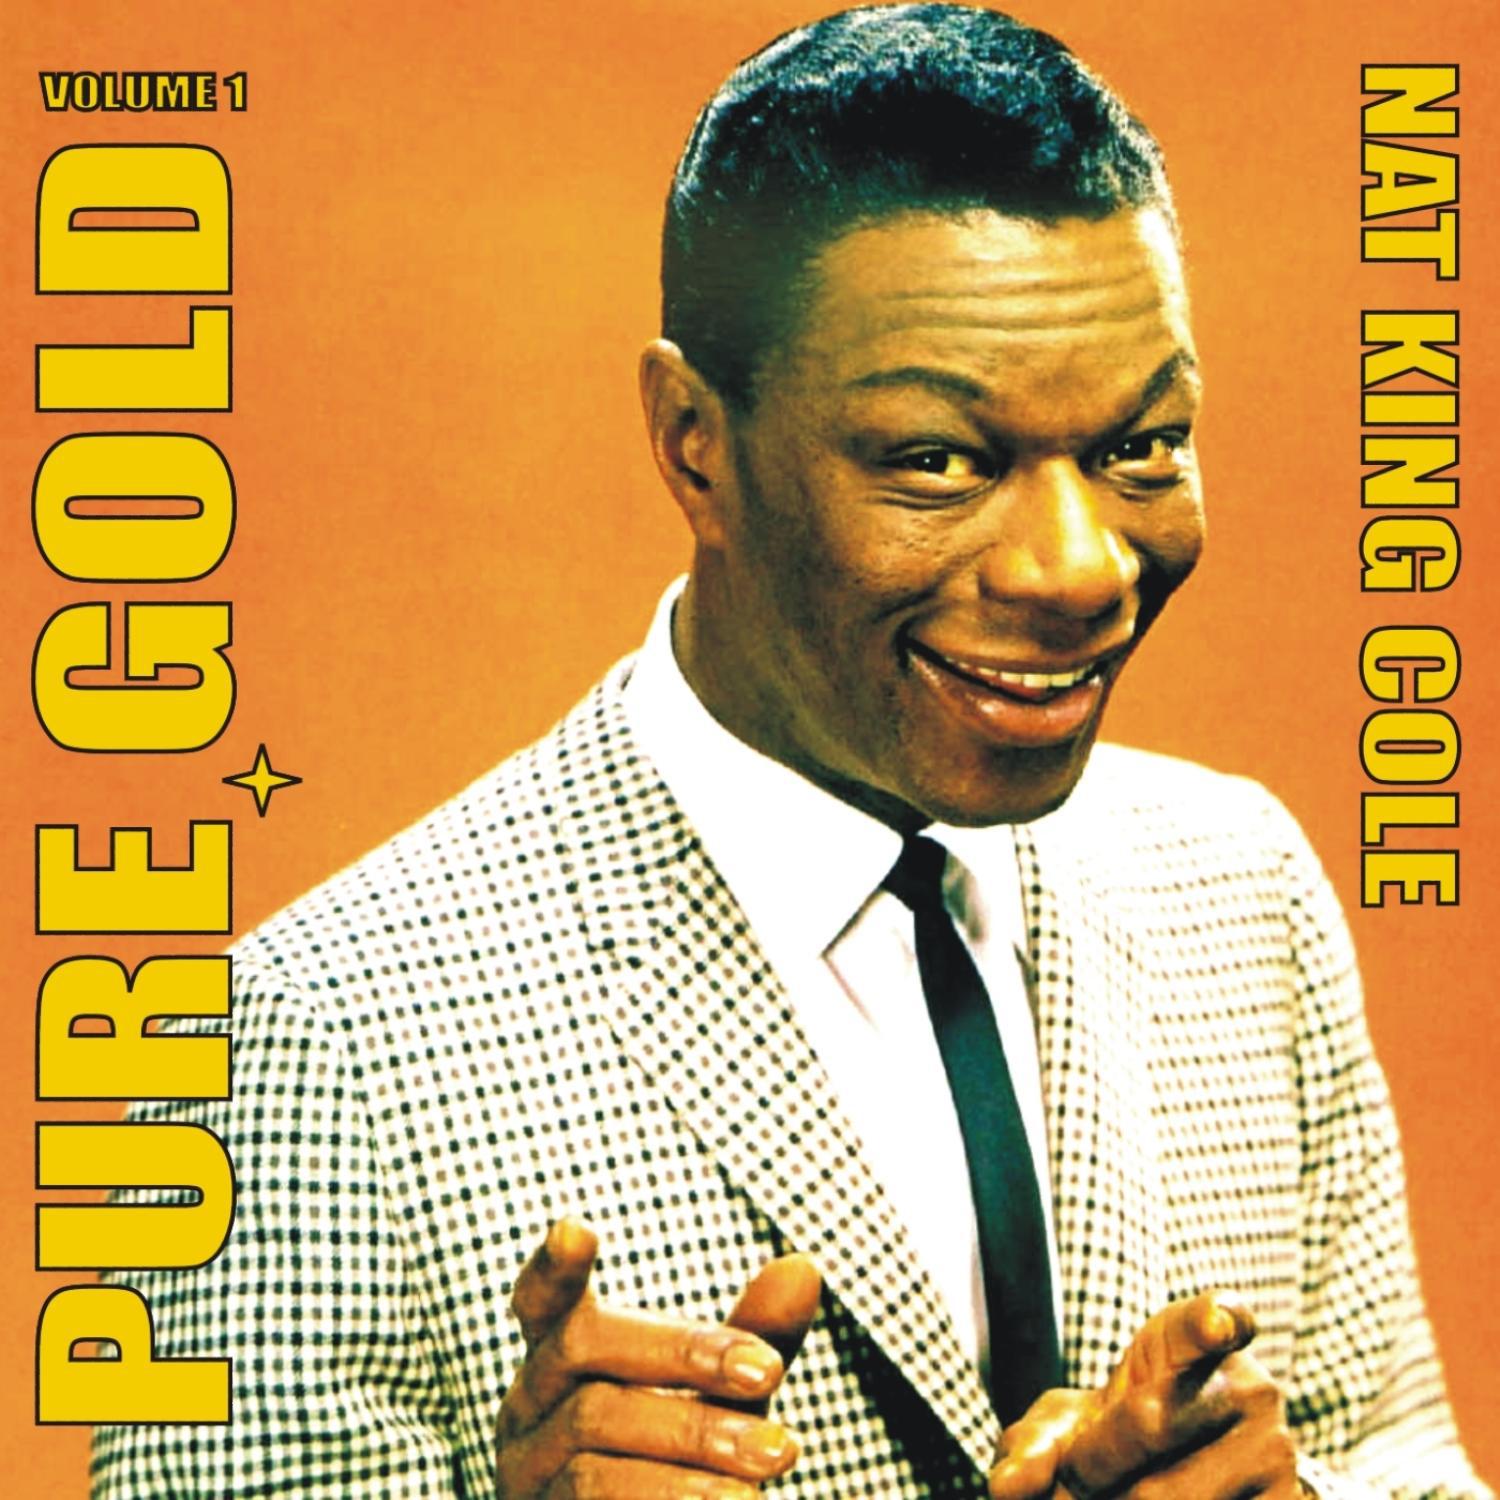 Pure Gold - Nat King Cole, Vol. 1